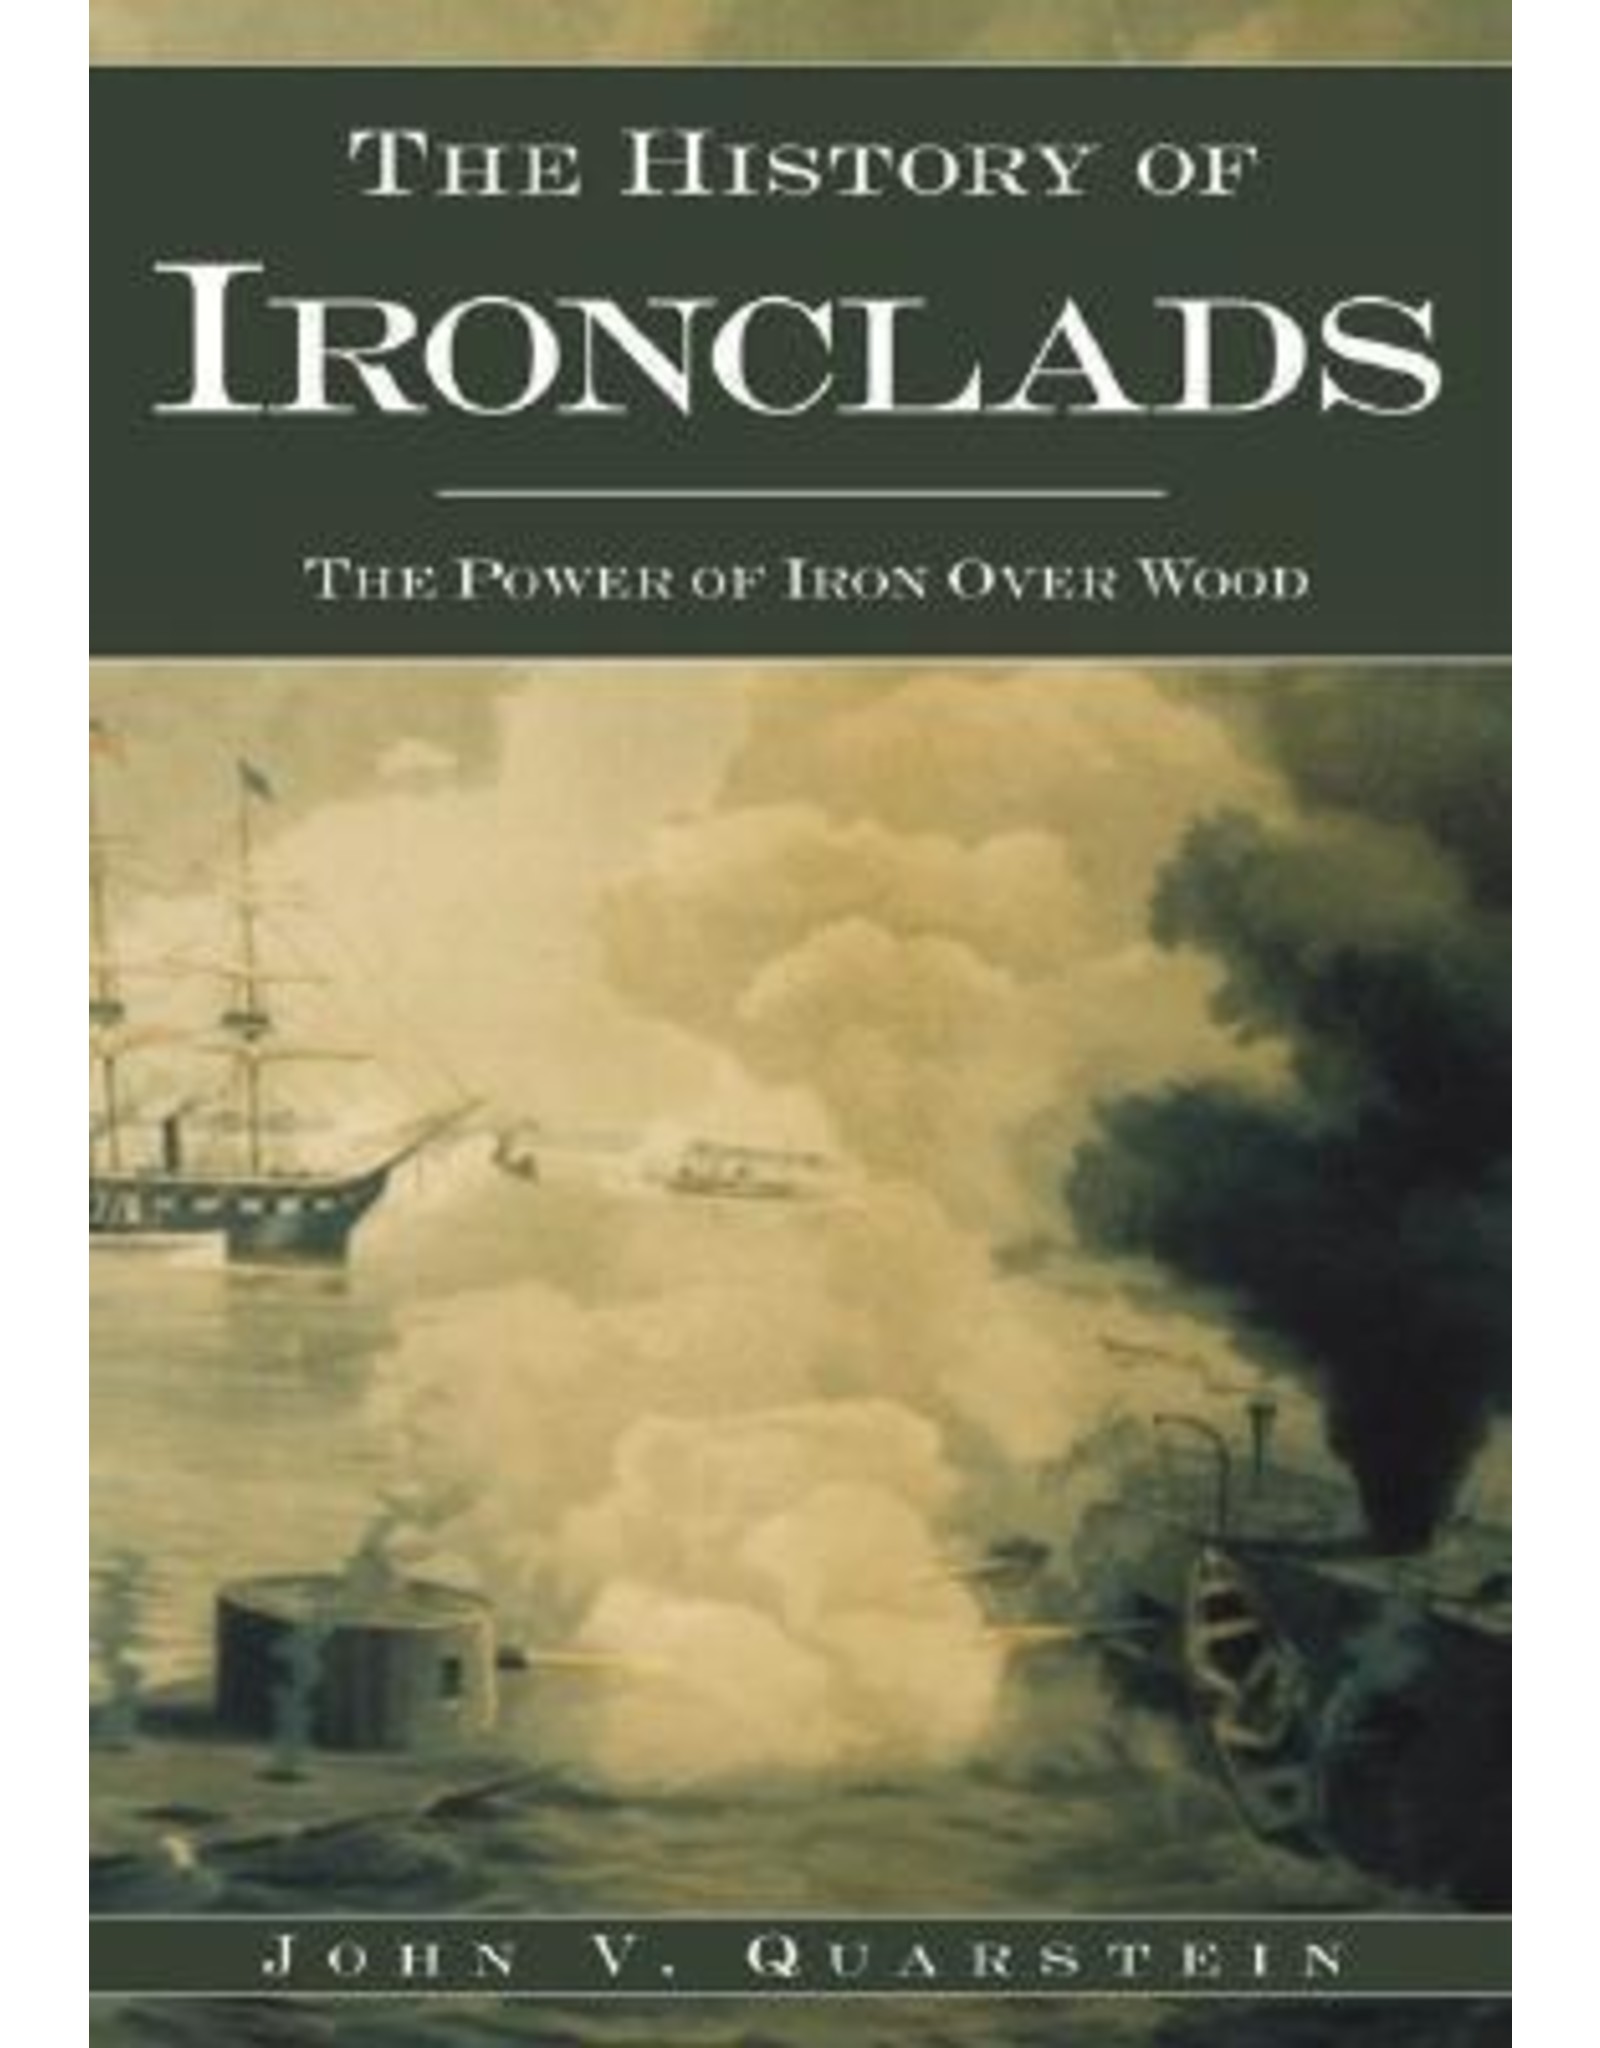 The History of Ironclads